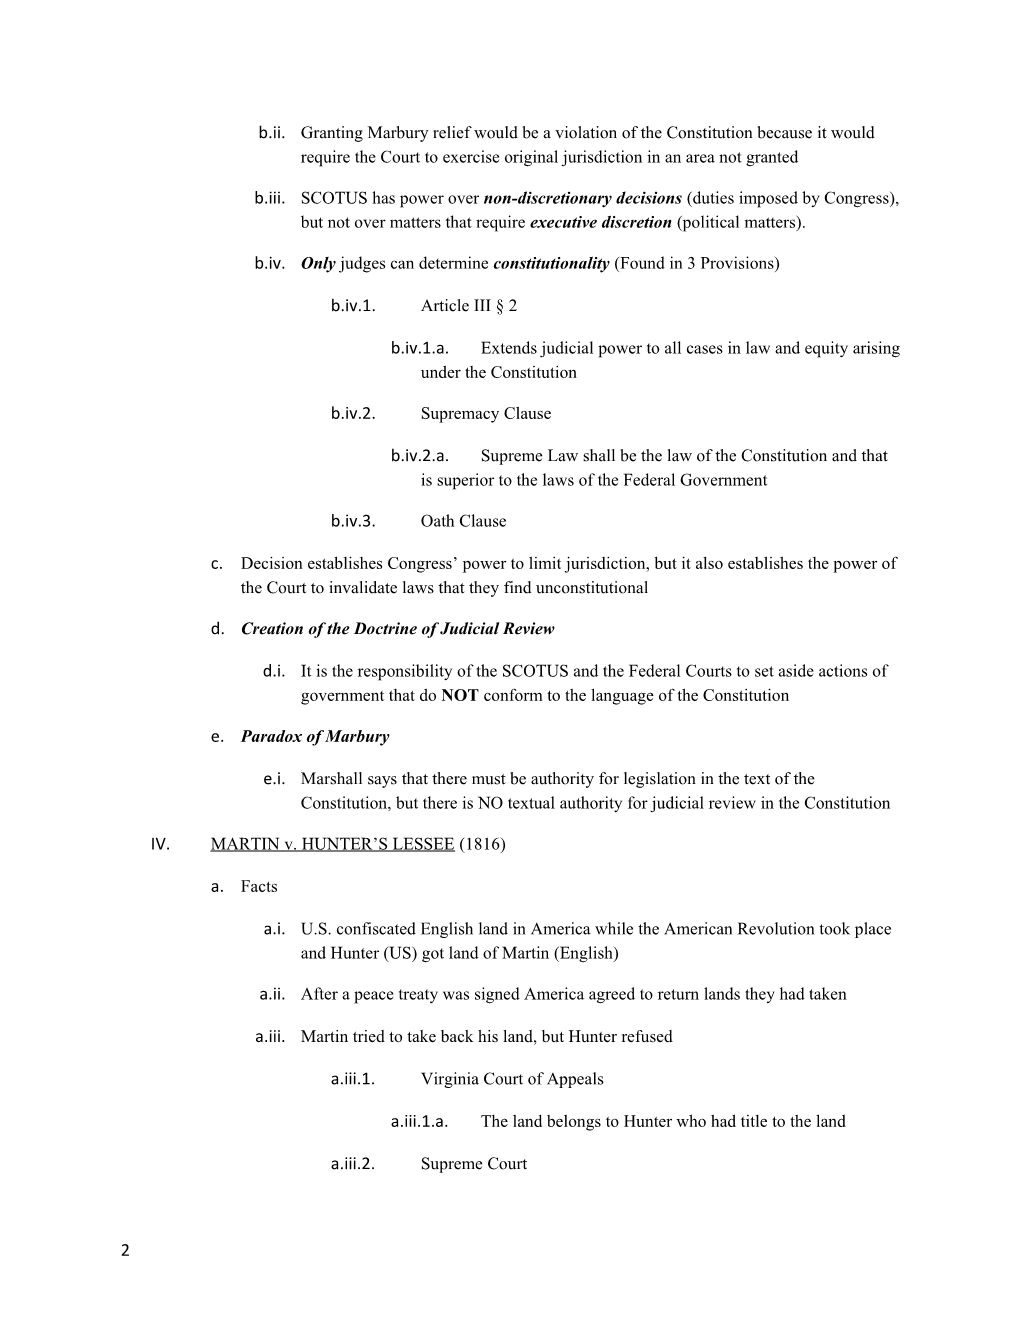 Constitutional Law Final Exam Outline Barron Spring 2011